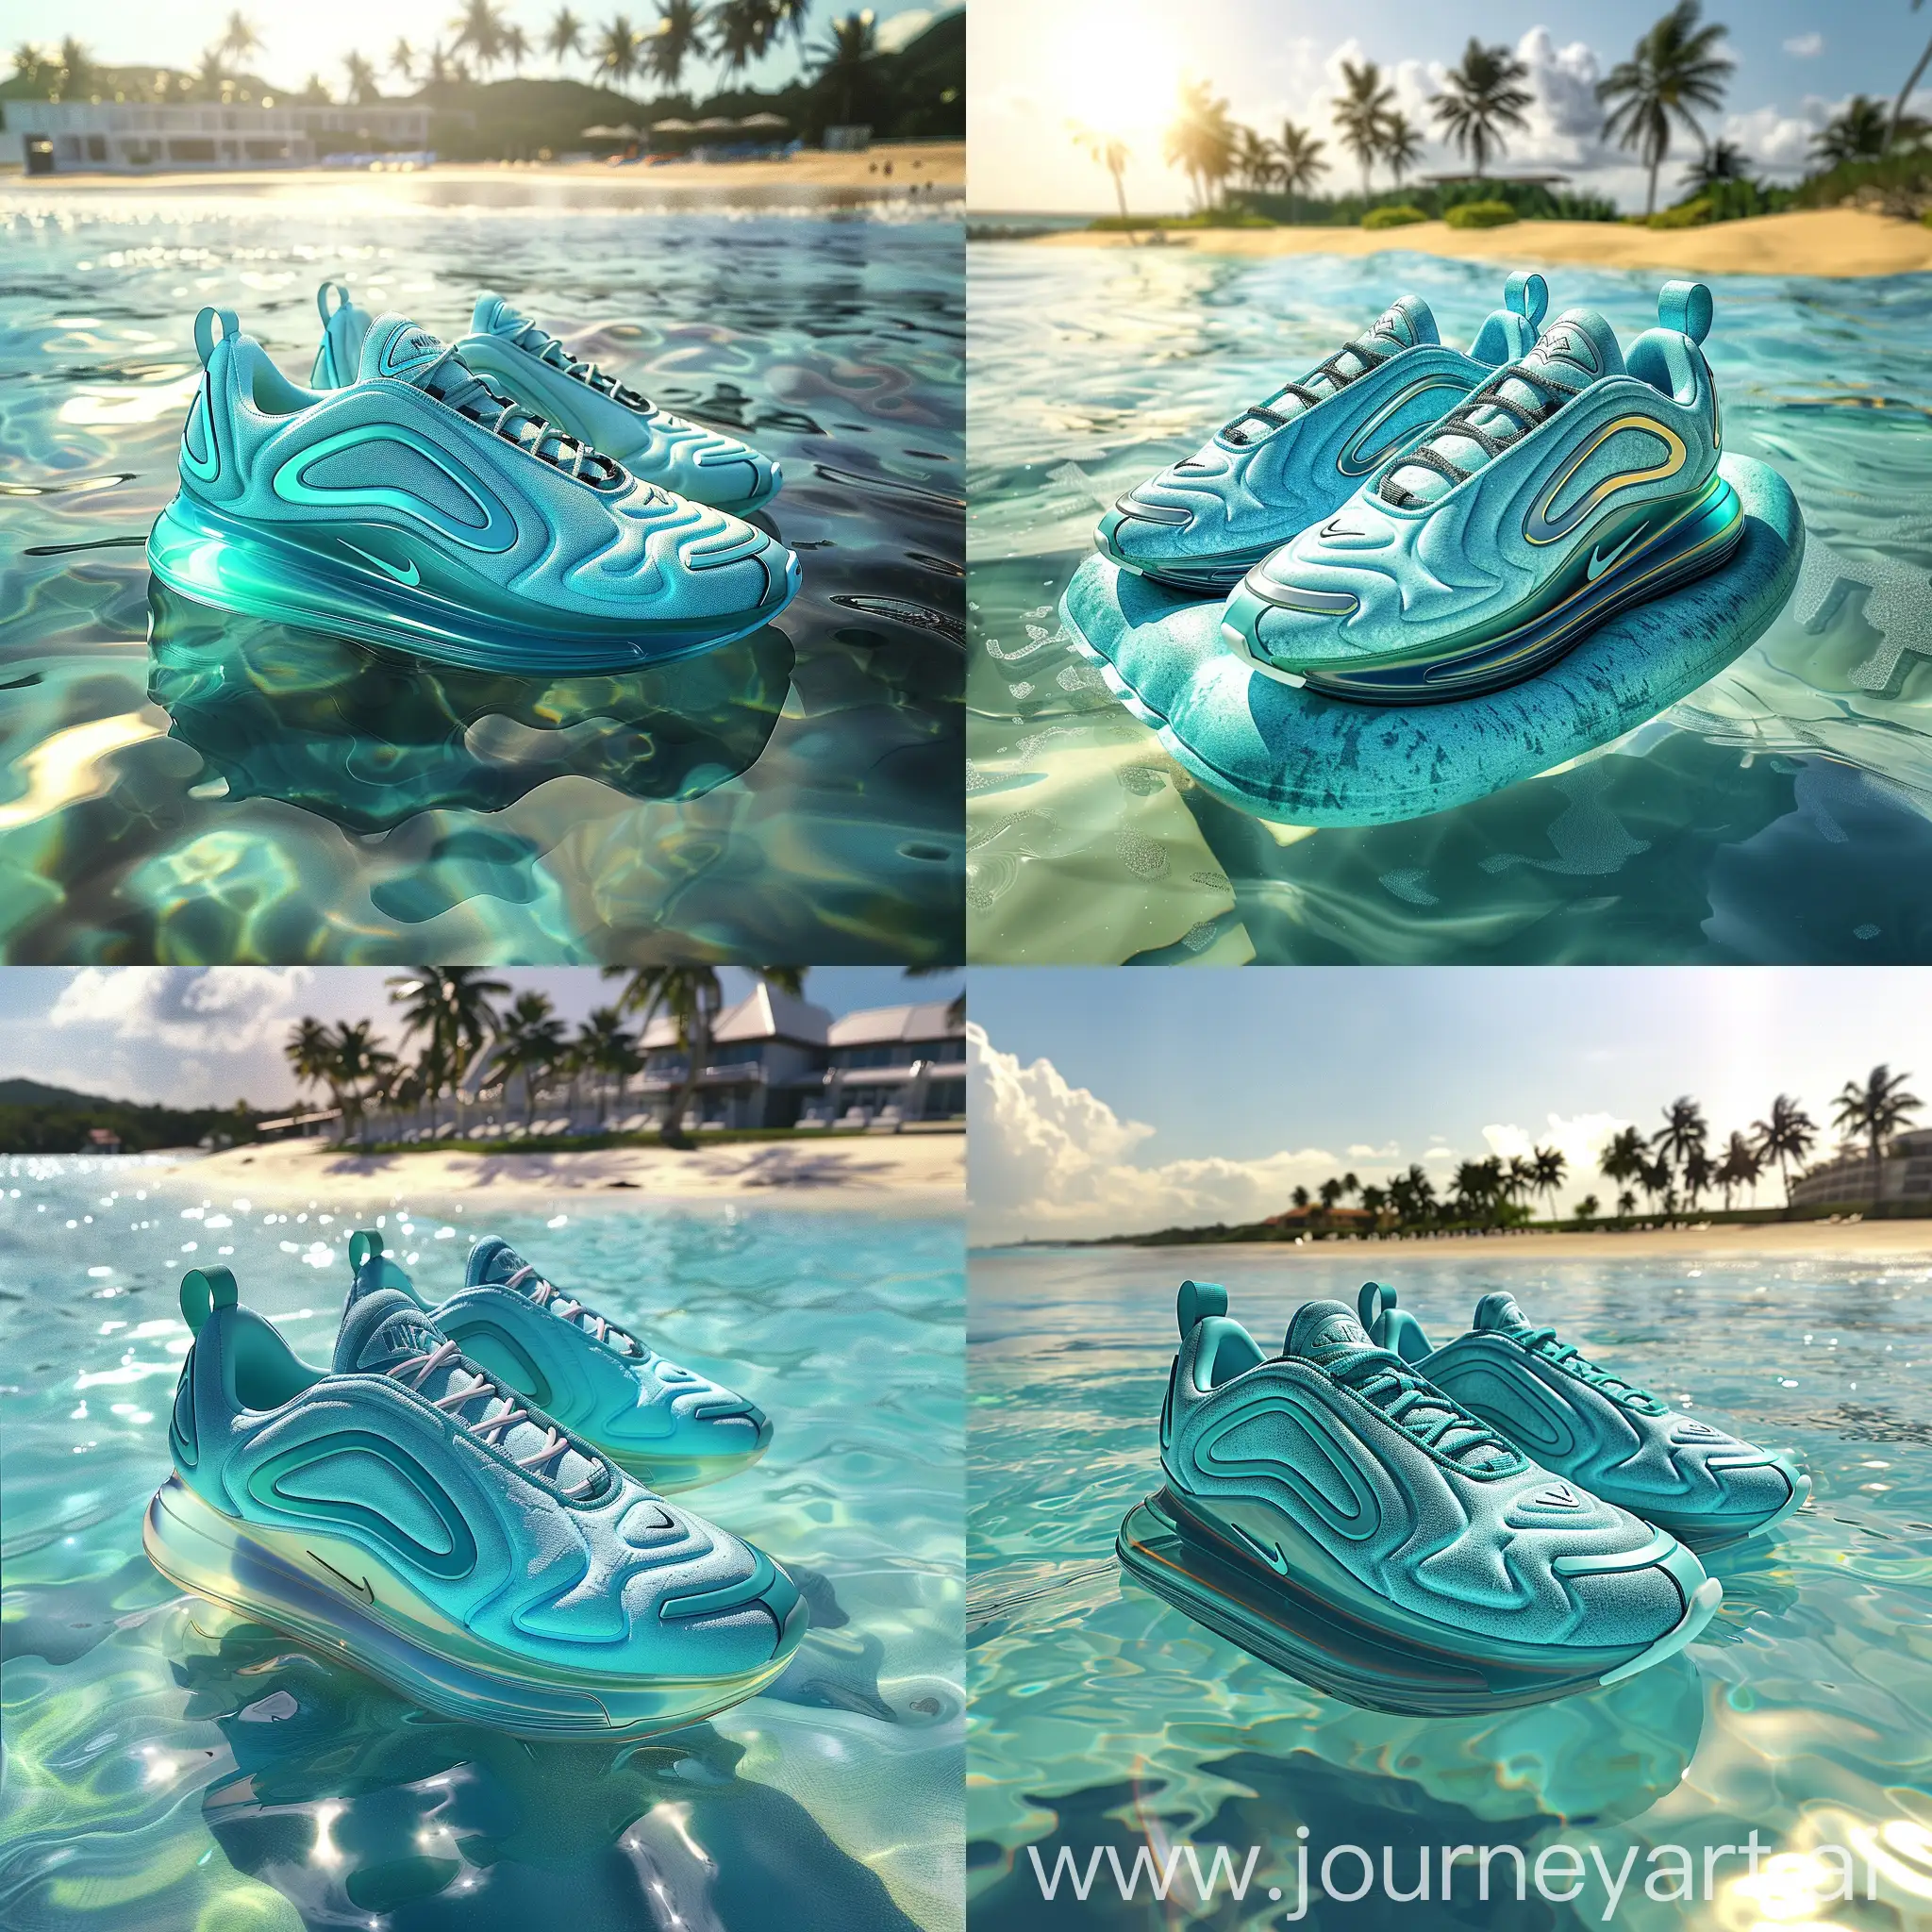 Turquoise-Nike-Air-Max-720-Sneakers-on-InflatableMattress-Summer-Fashion-Shoot-by-CrystalClear-Sea